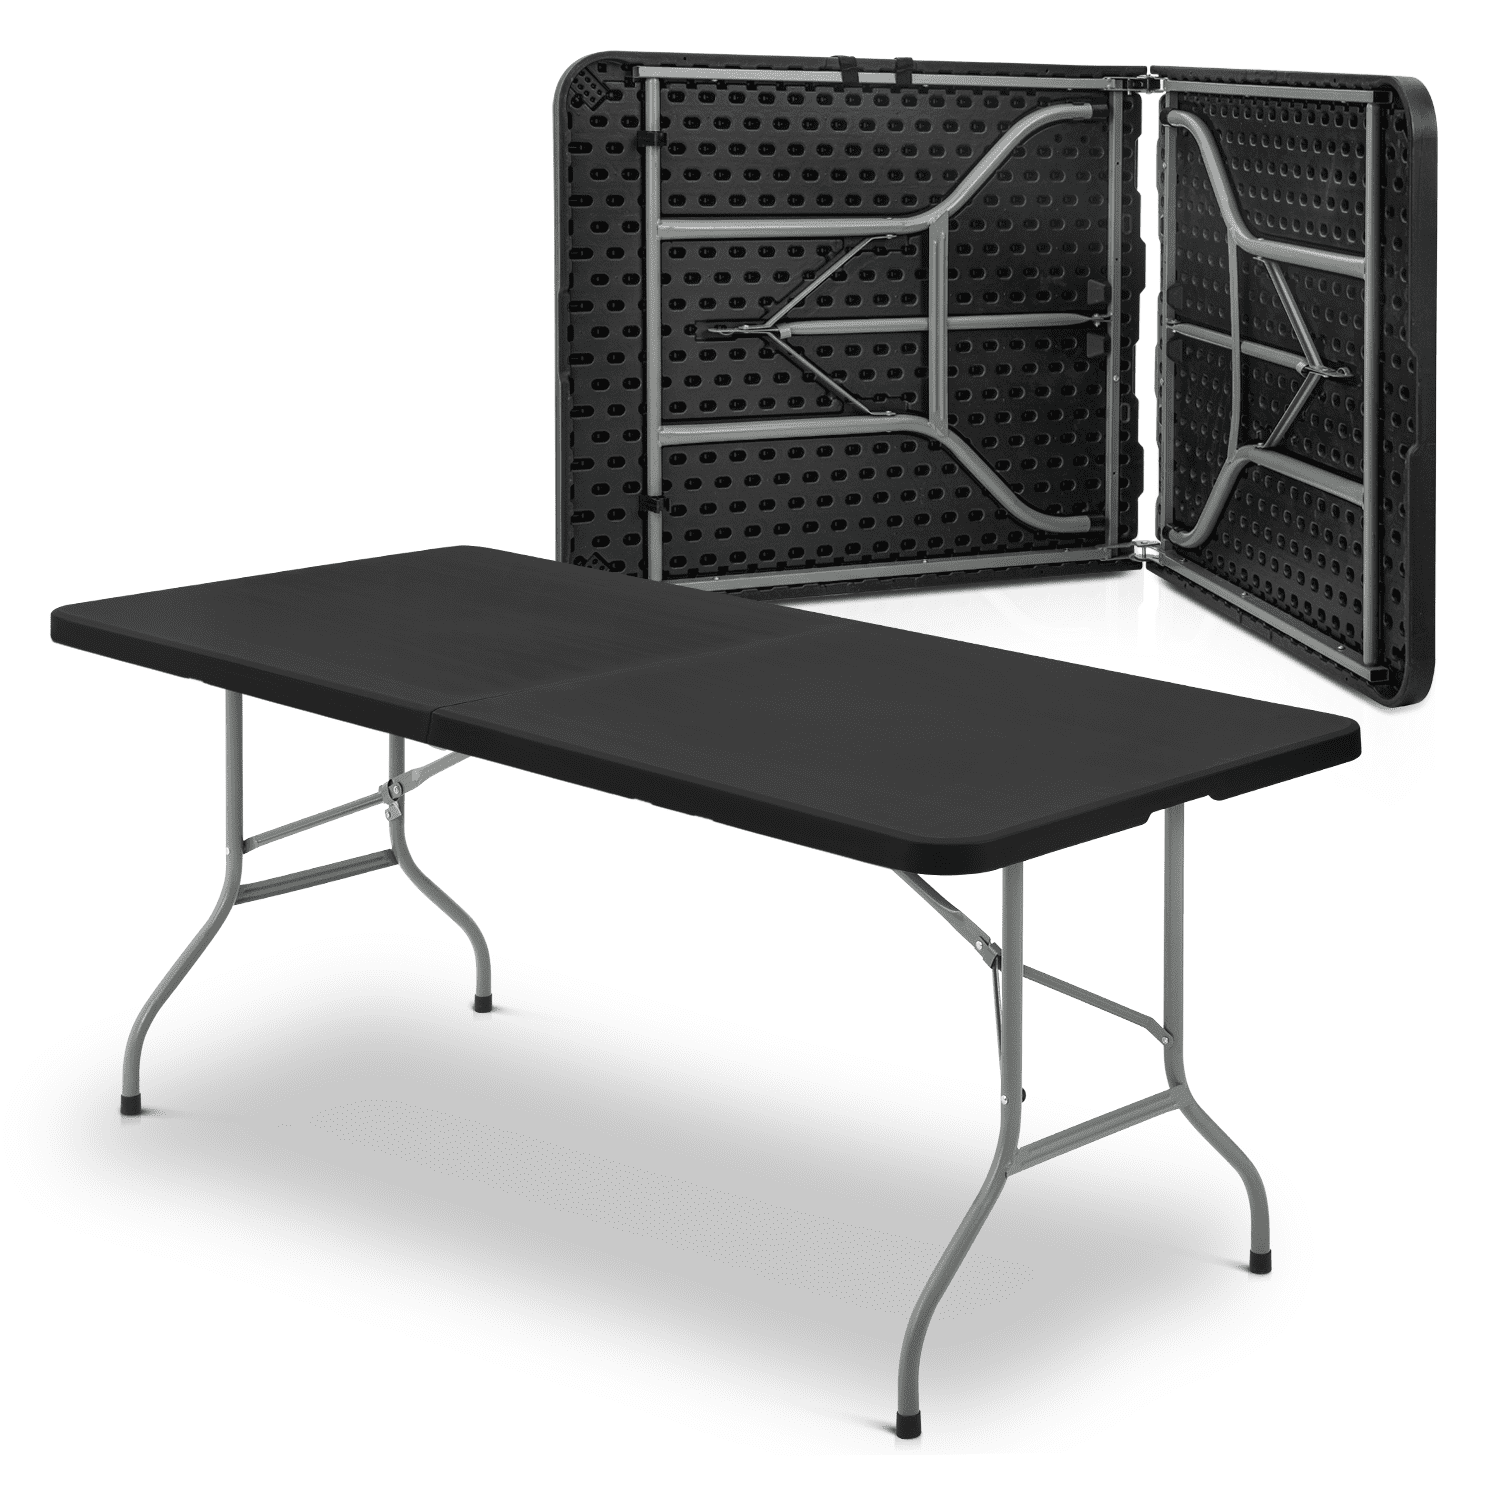 Folding Table Set - Set of 2 Lightweight Portable Tables - Small Plastic  Desk for Camping, Playing Cards, Crafting, and More by Everyday Home (Black)